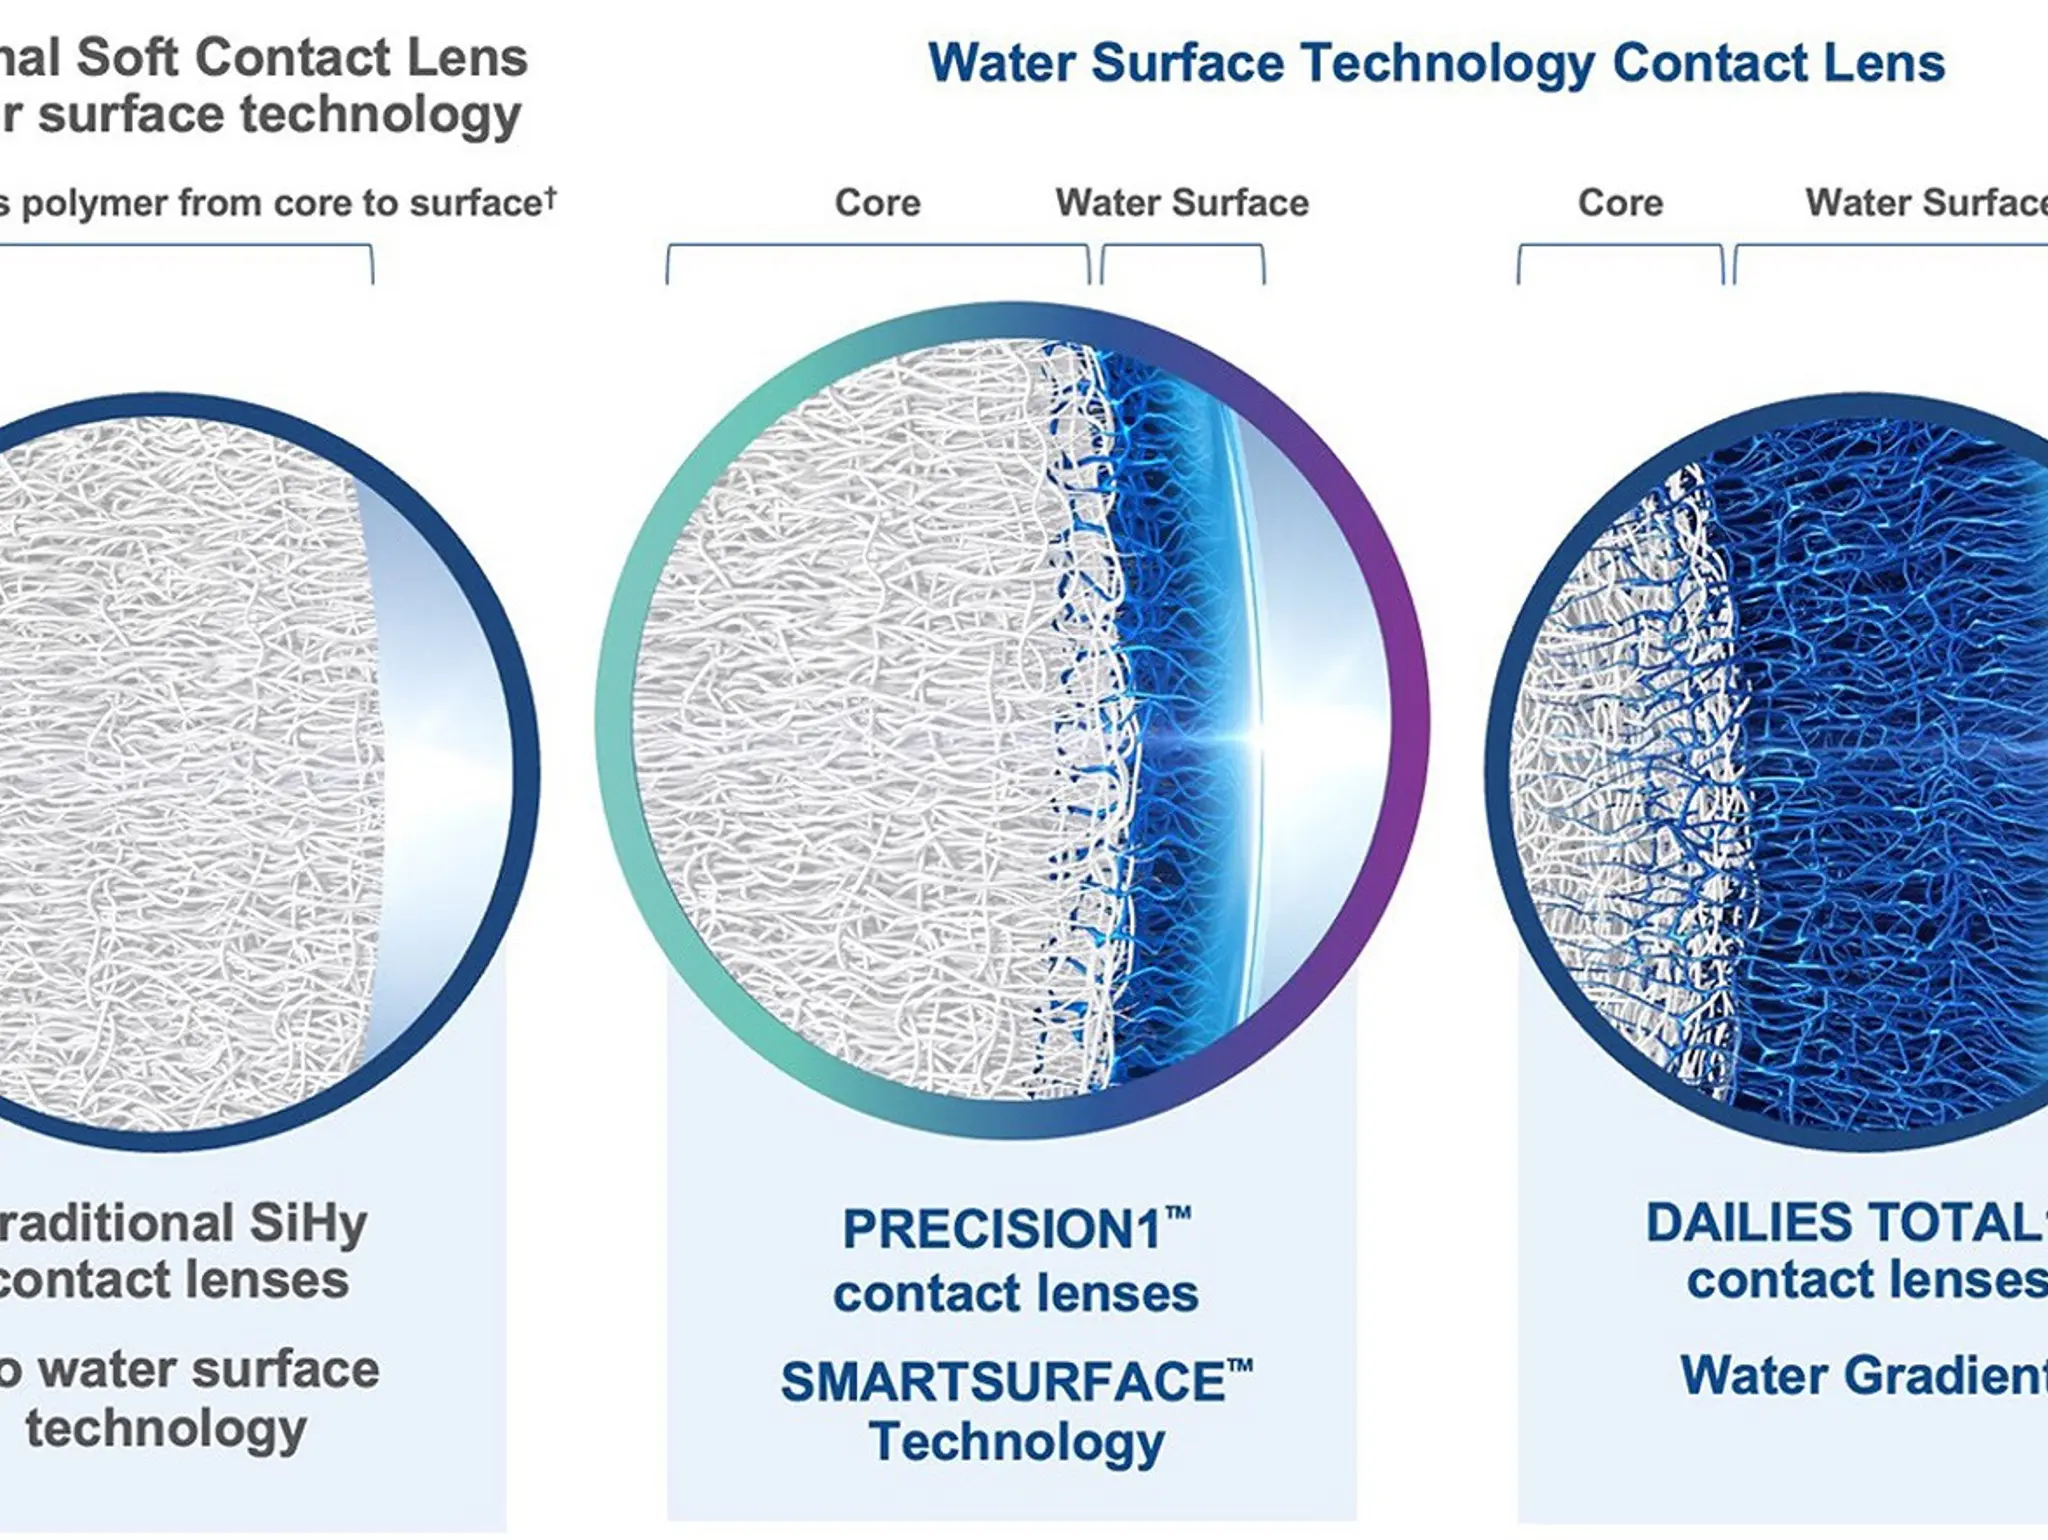 Water Surface Technology Contact Lenses vs. Traditional Soft Contact Lenses